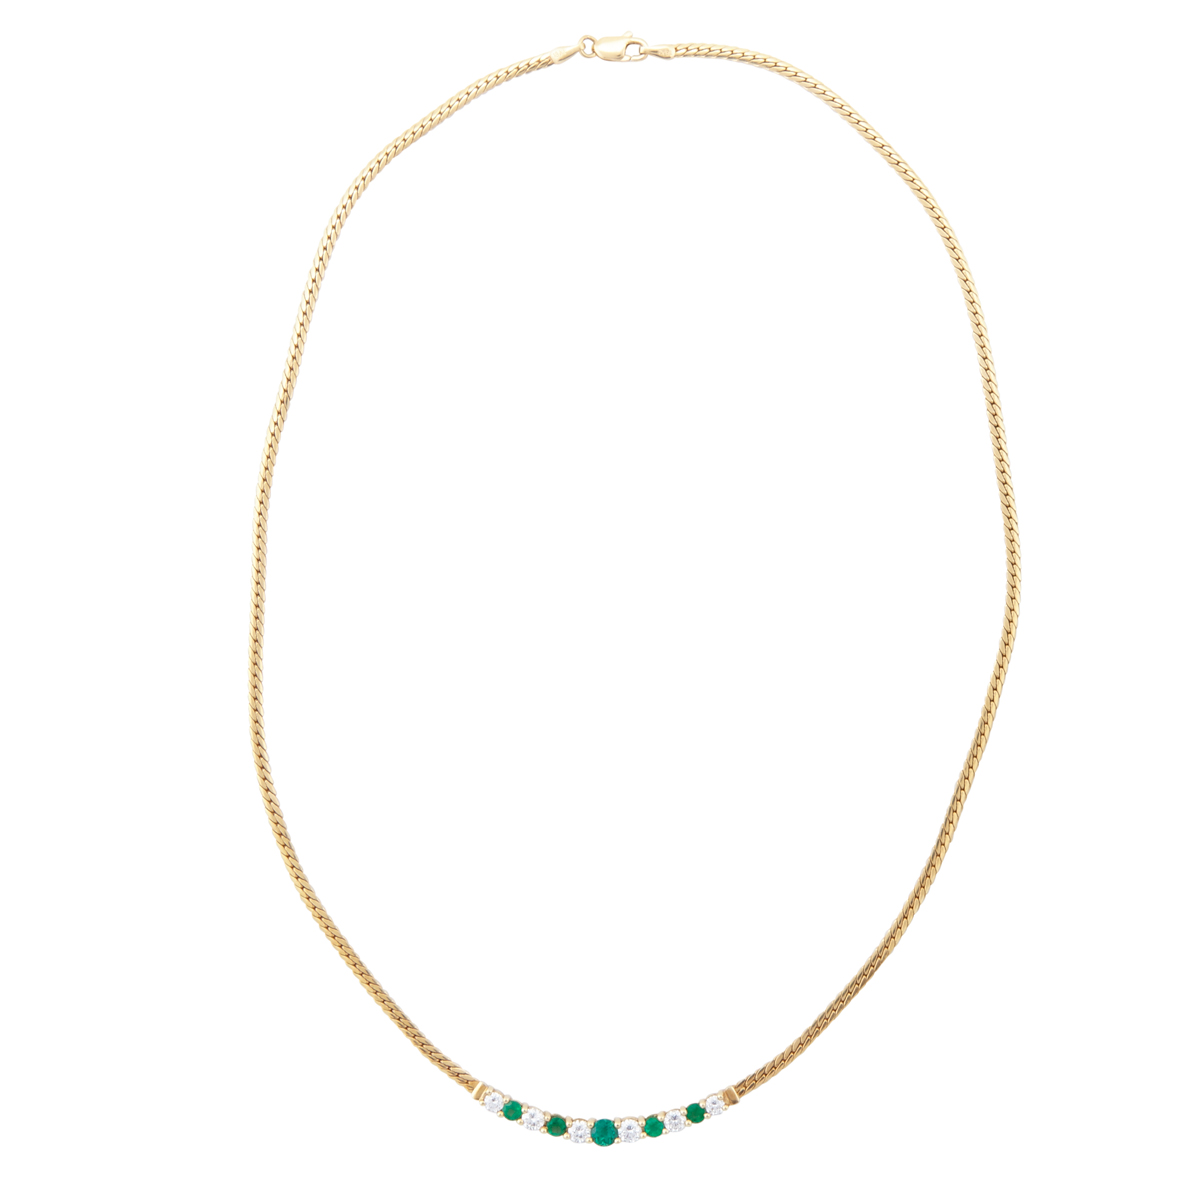 Birks 18k Yellow Gold Necklace